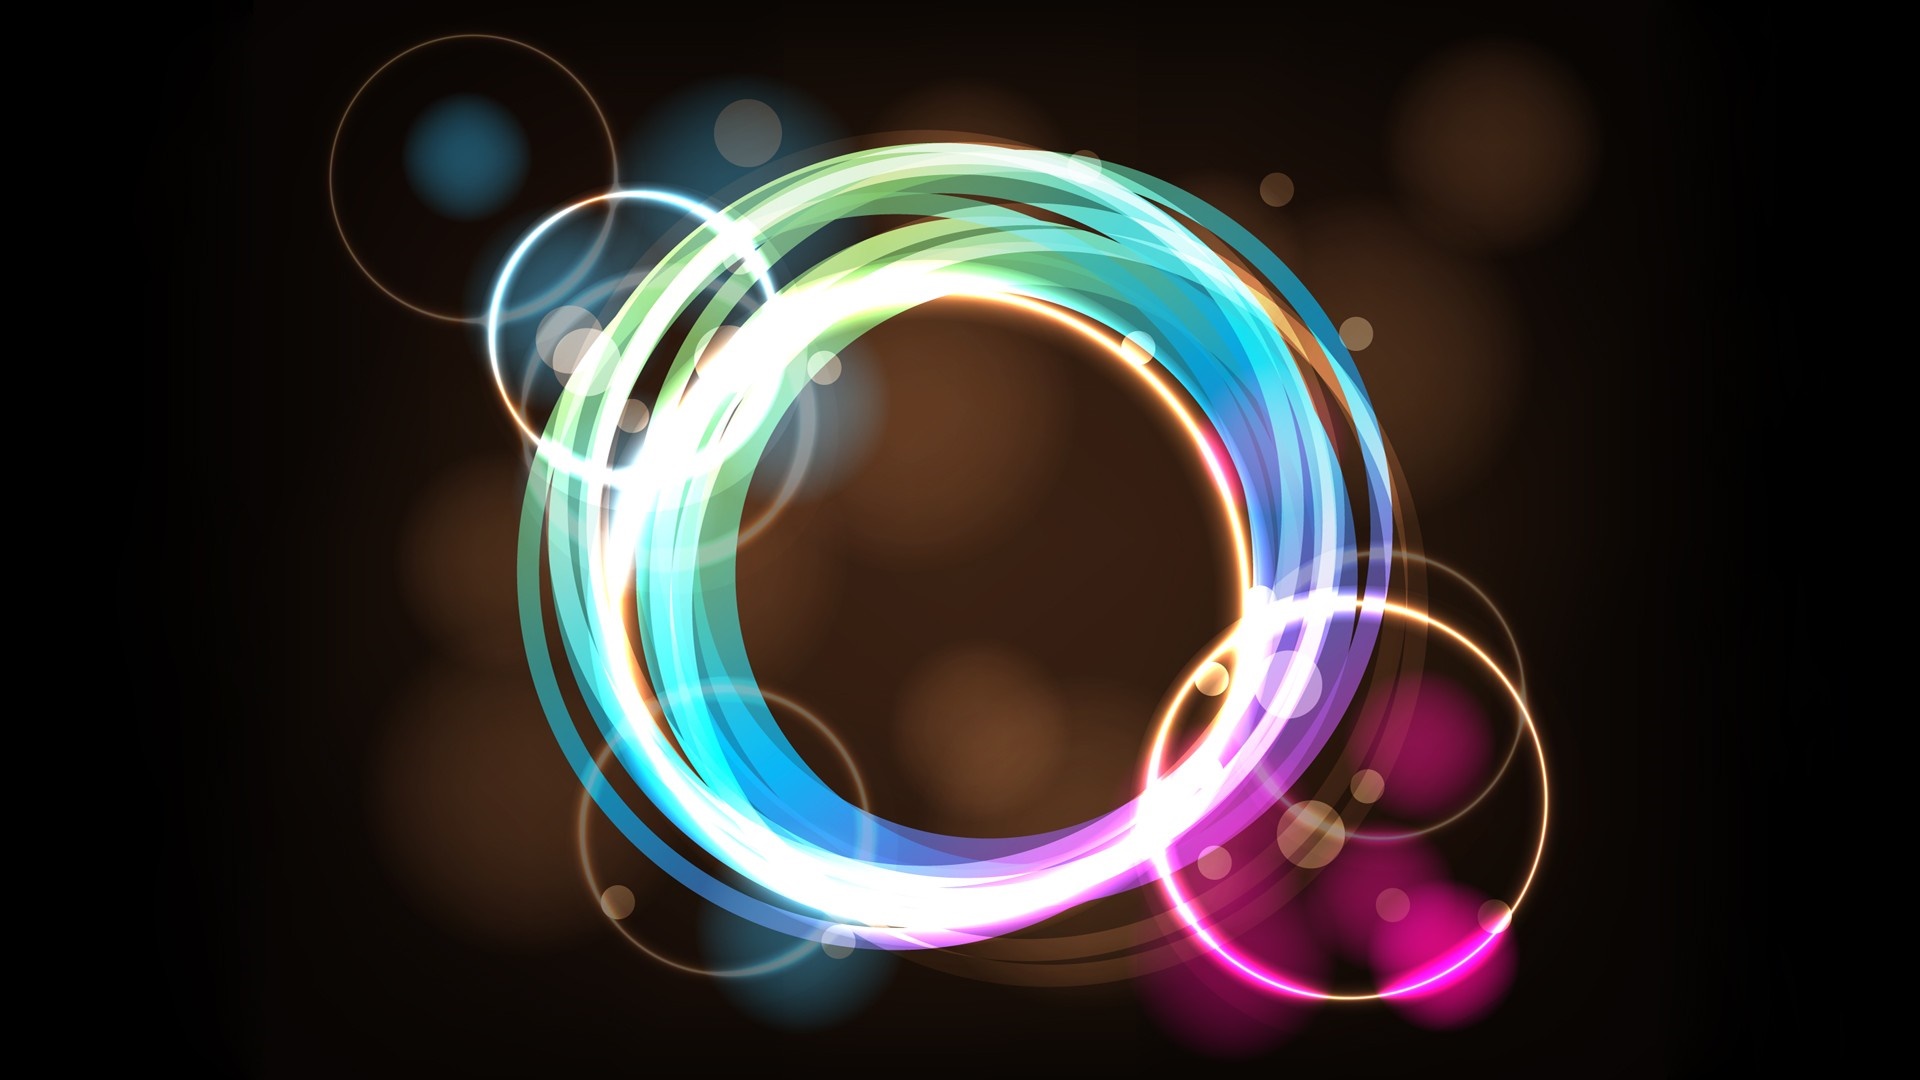 colorful, neon, abstract, blue, circle, shapes, brown background, light, color, number, computer wallpaper, font, poi. Mocah HD Wallpaper